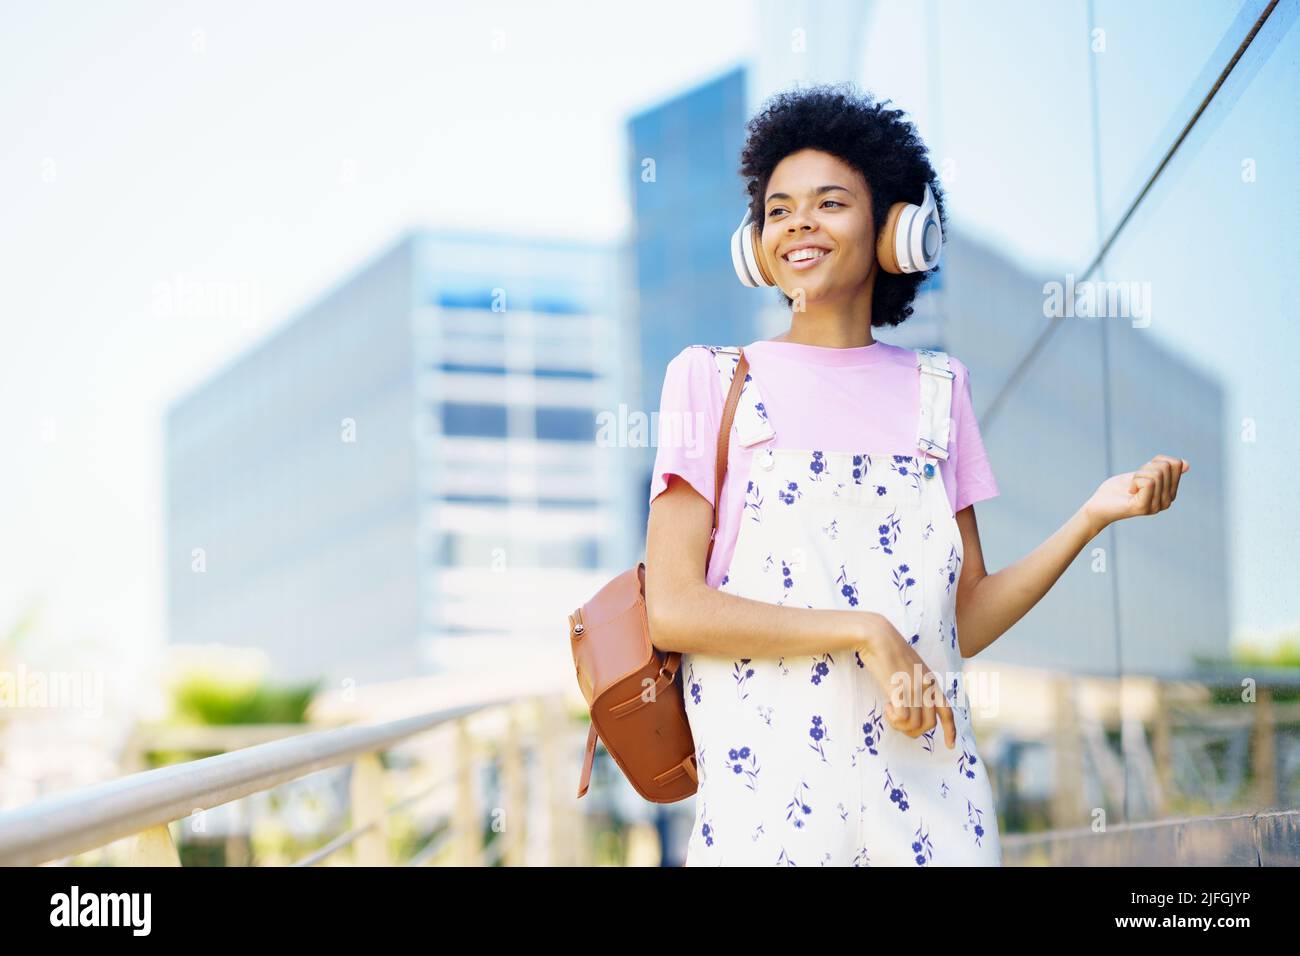 Content black woman listening to music in city Stock Photo